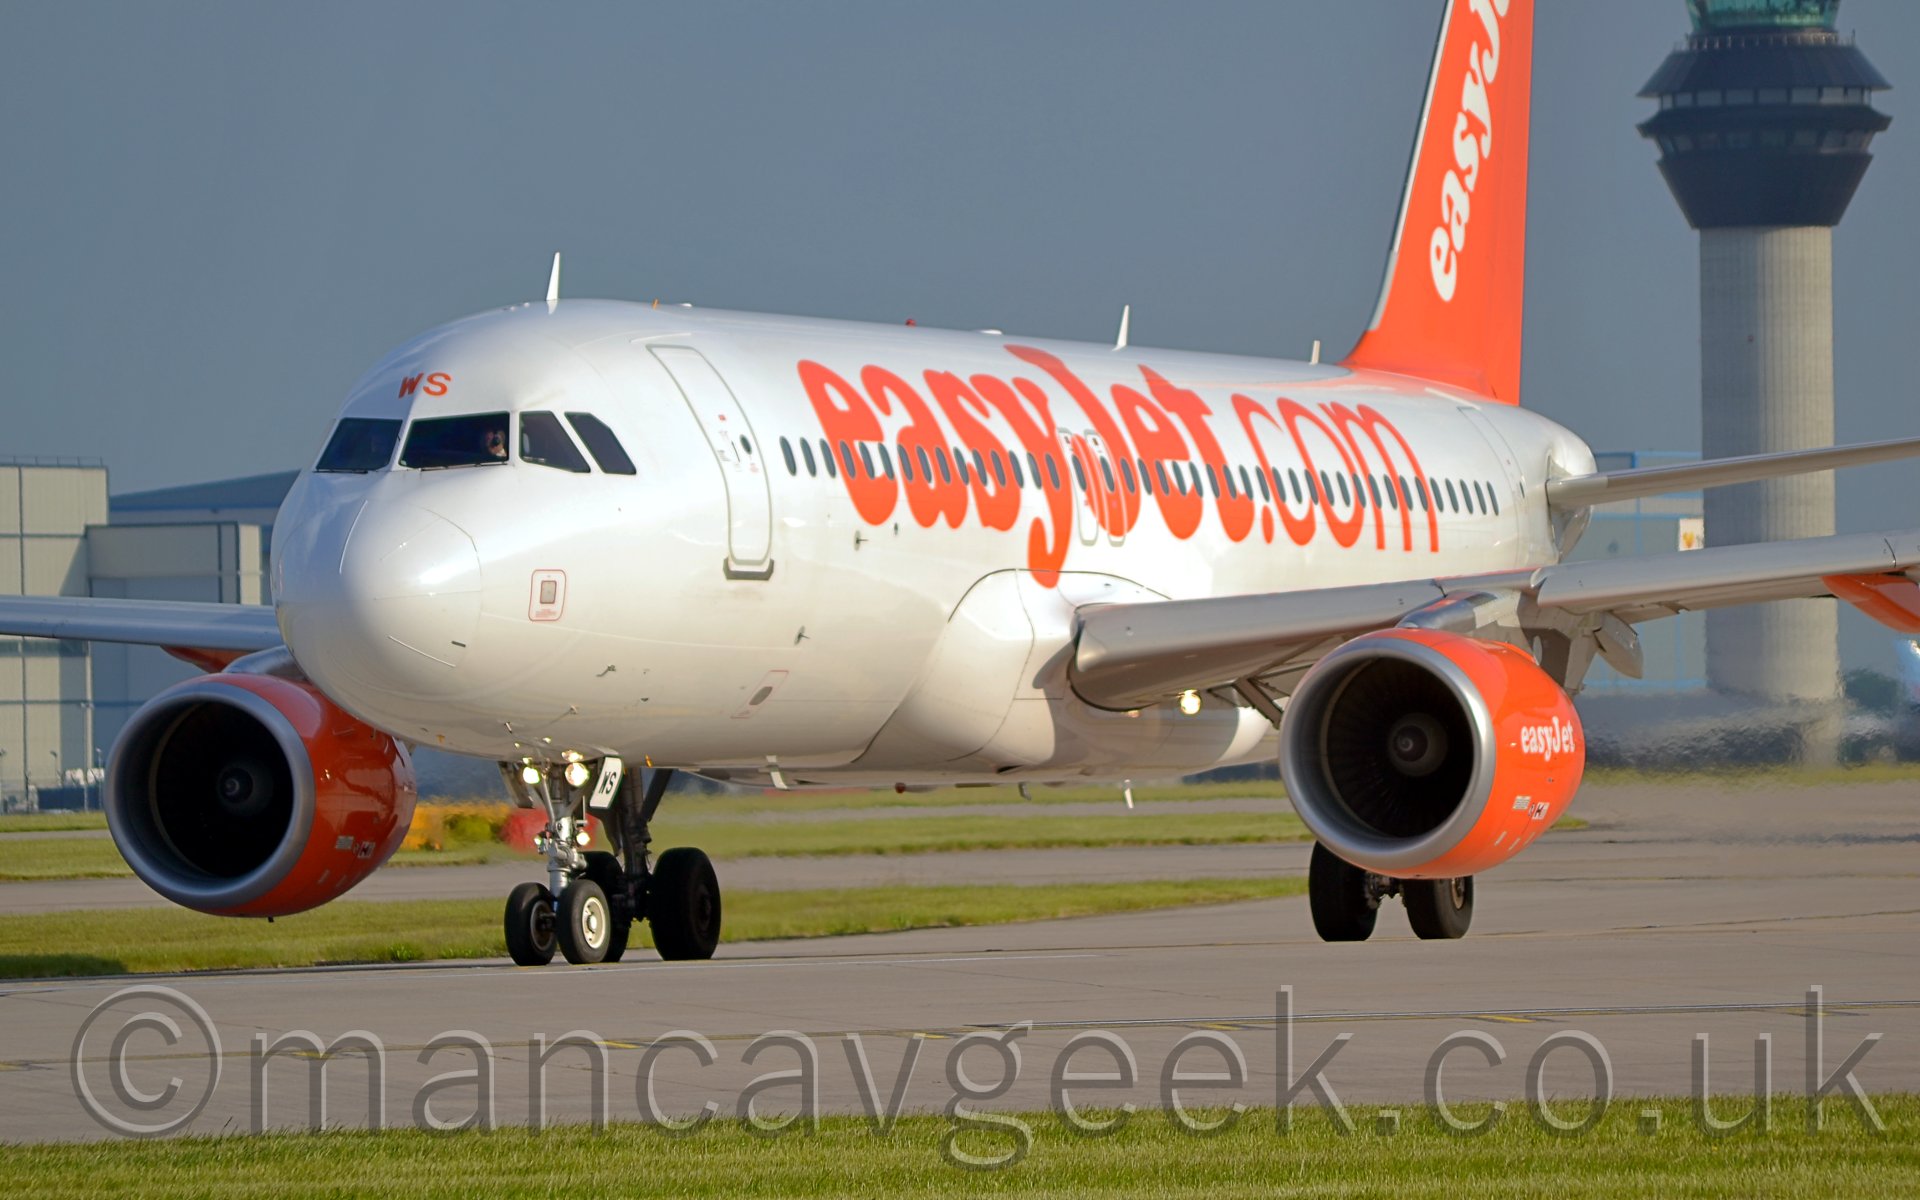 Side view of a twin engined jet airliner taxiing to the left of the camera, turning further to the left. The plane is mostly white, with large billboard-style orange "easyJet.com" titles on the fuselage, The tail is a bright orange, with diagonal white "easyJet" titles, with the engines also being orange with white titles. In the background, a large grey hangar is visible over the right wing, whileanother large grey hangar and a tall control tower is visible over the right wing. The sky is a hazy blue-grey.